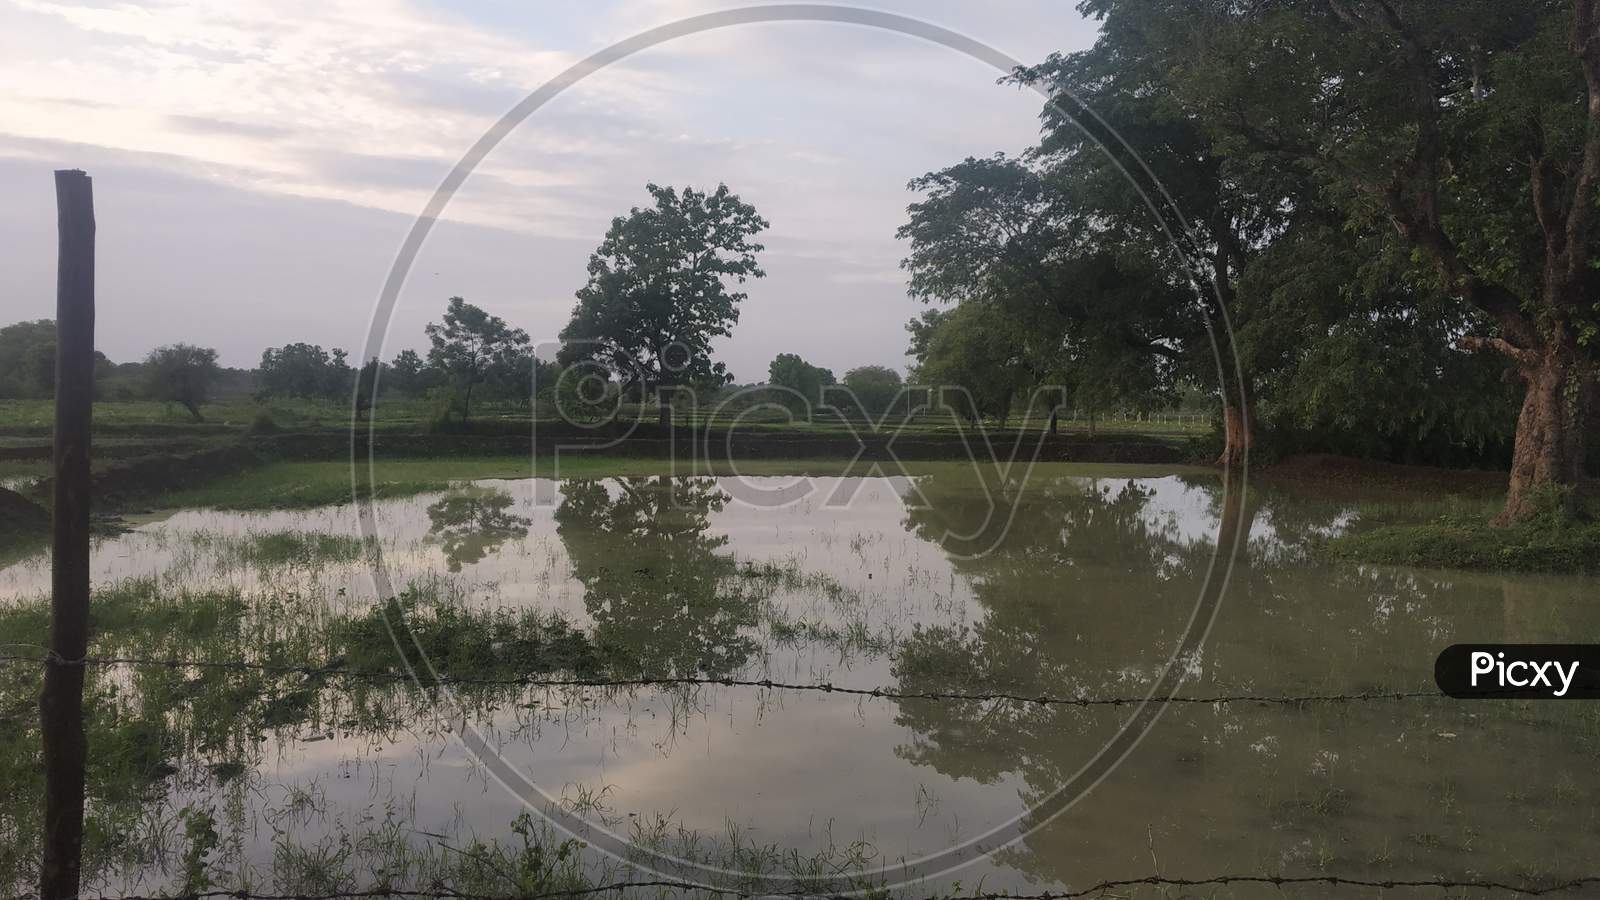 Reflection Of Big Tree In Farm Water